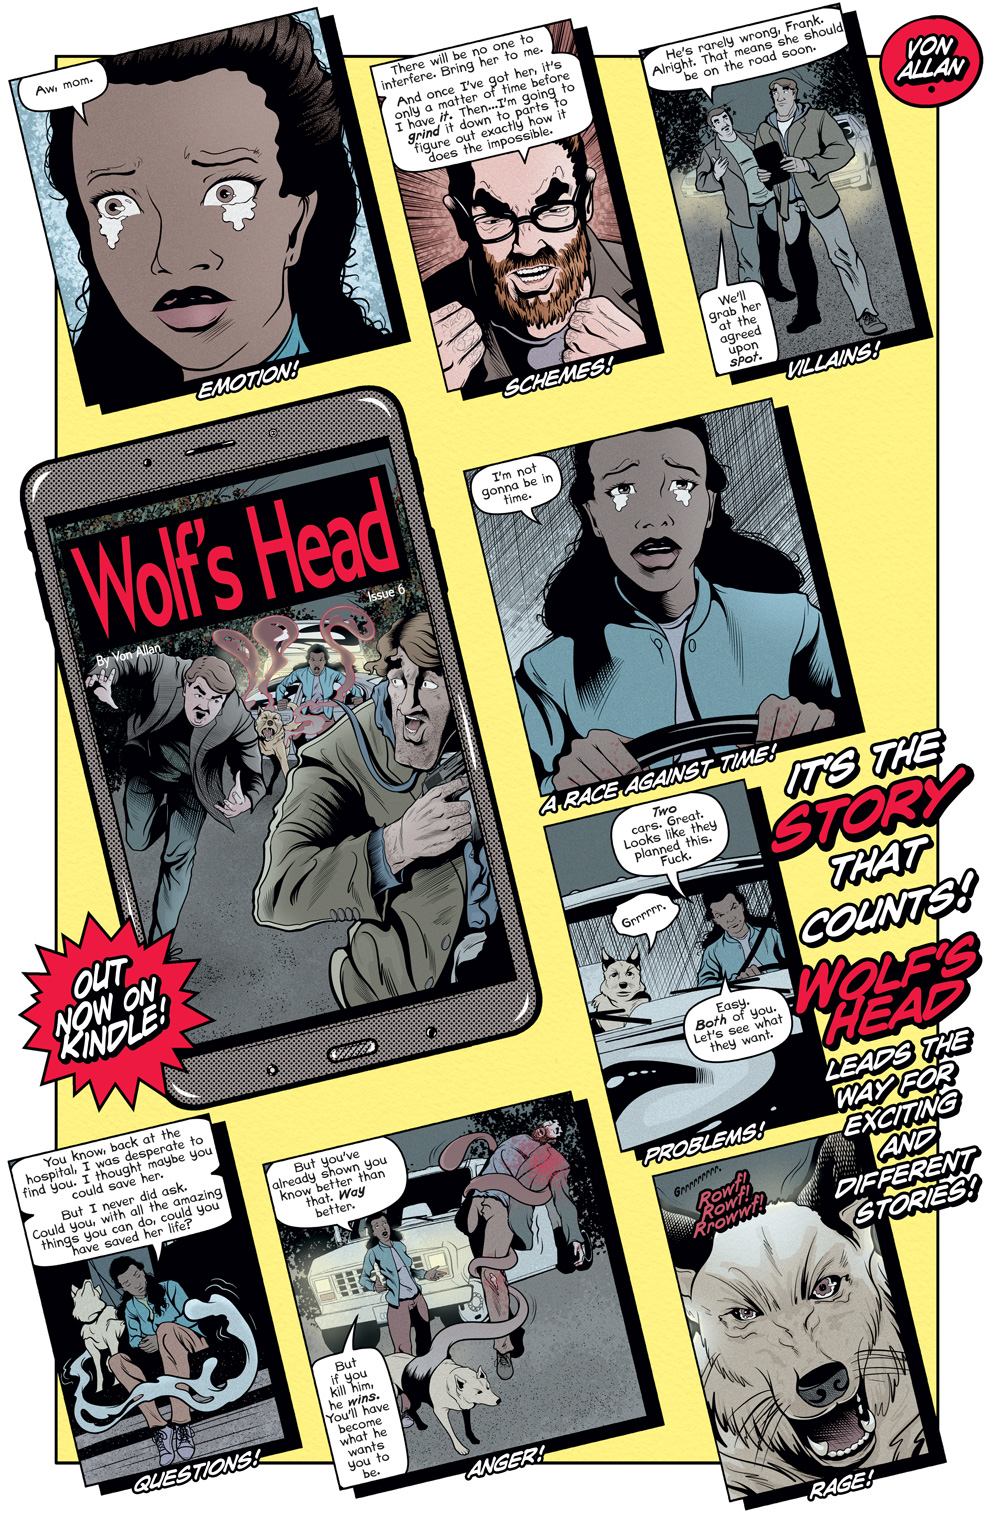 Teaser image for the digital edition of WOLF'S HEAD issue 6 written and illustrated by Von Allan